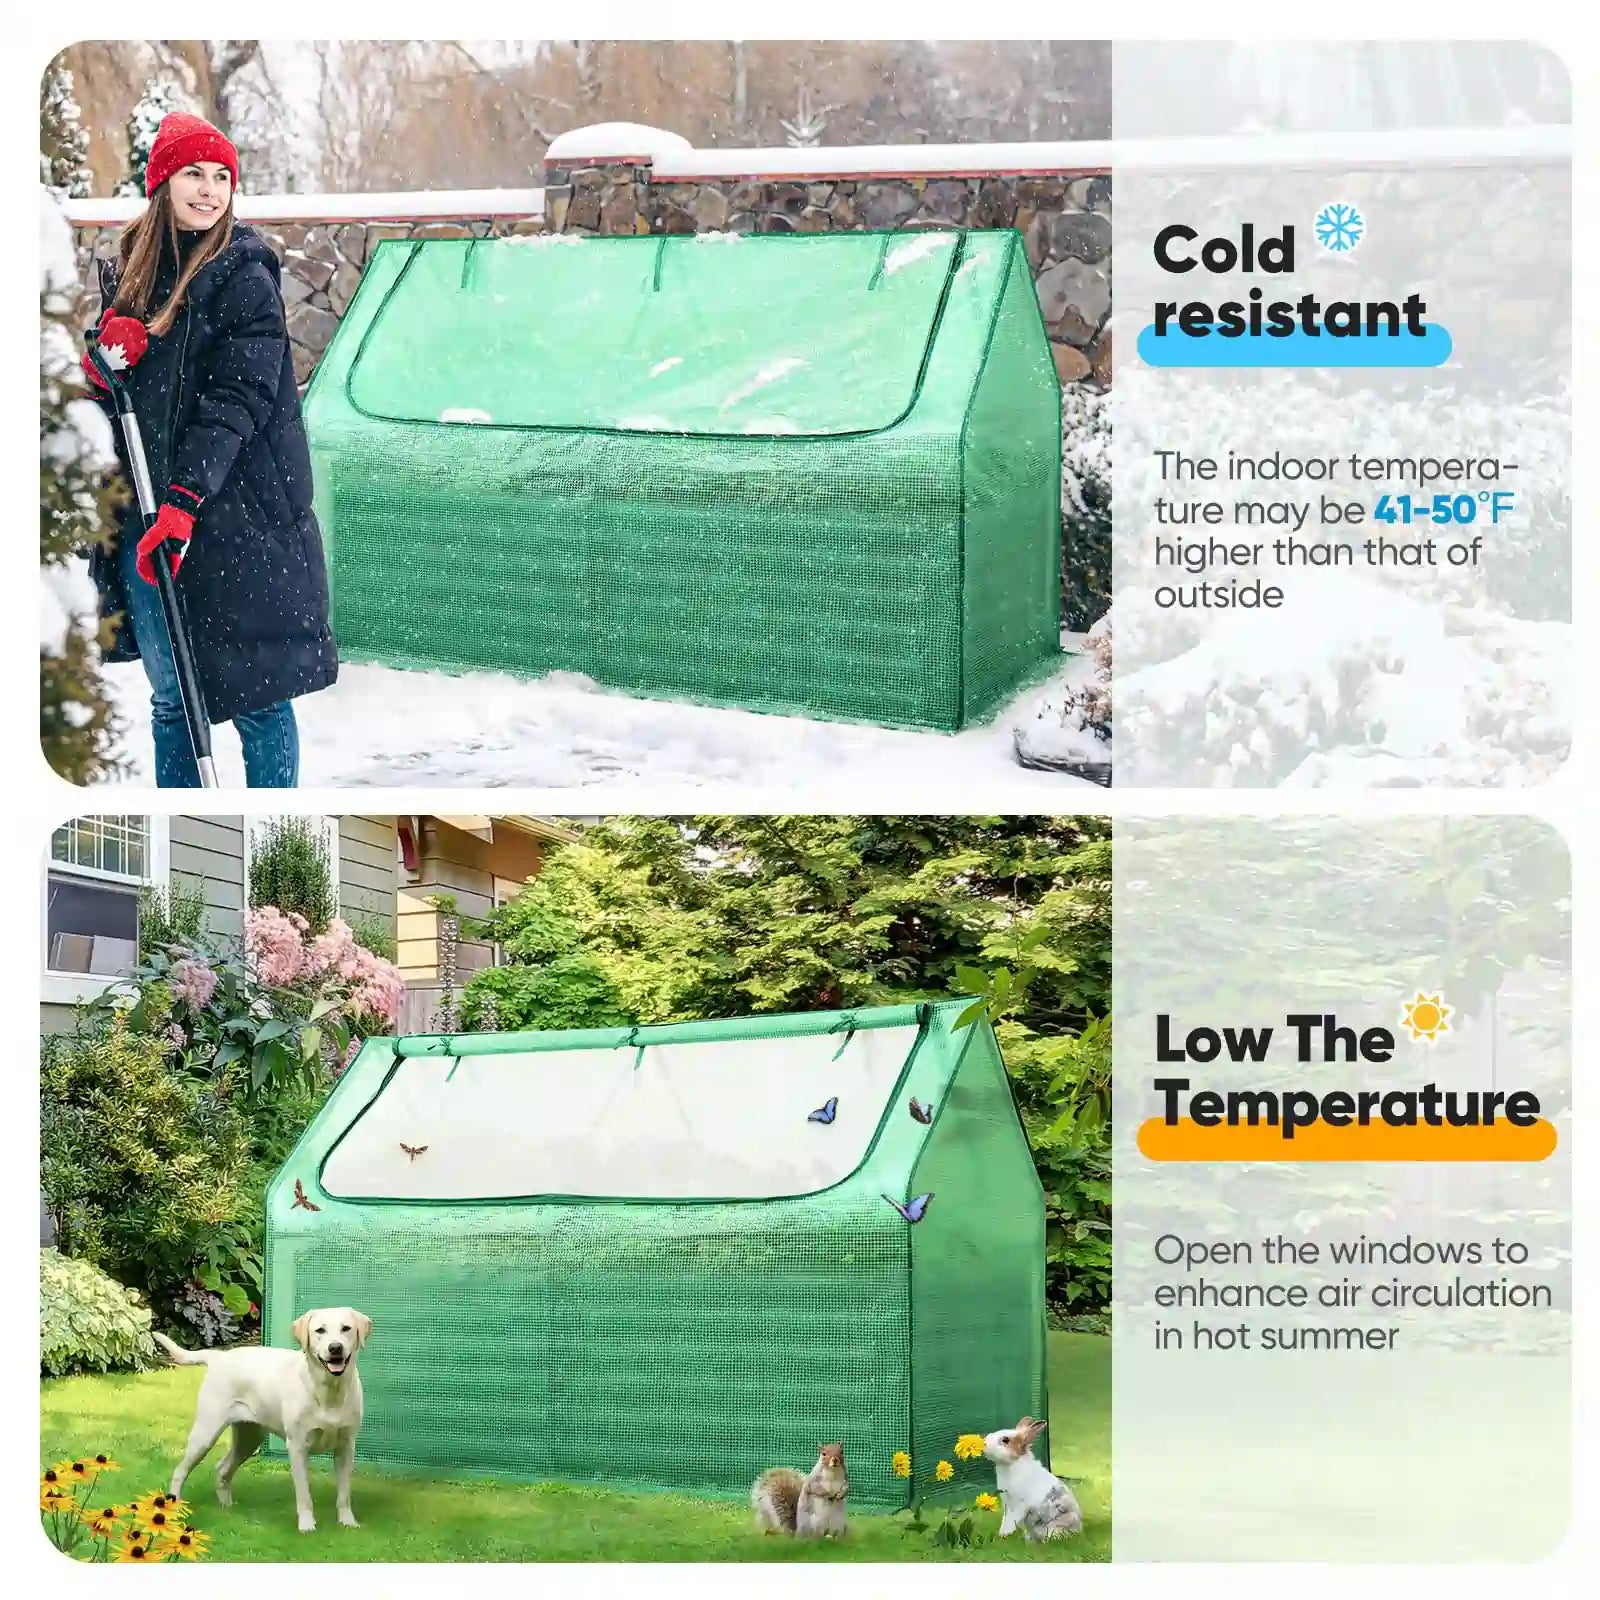 Cold resistant#color_green